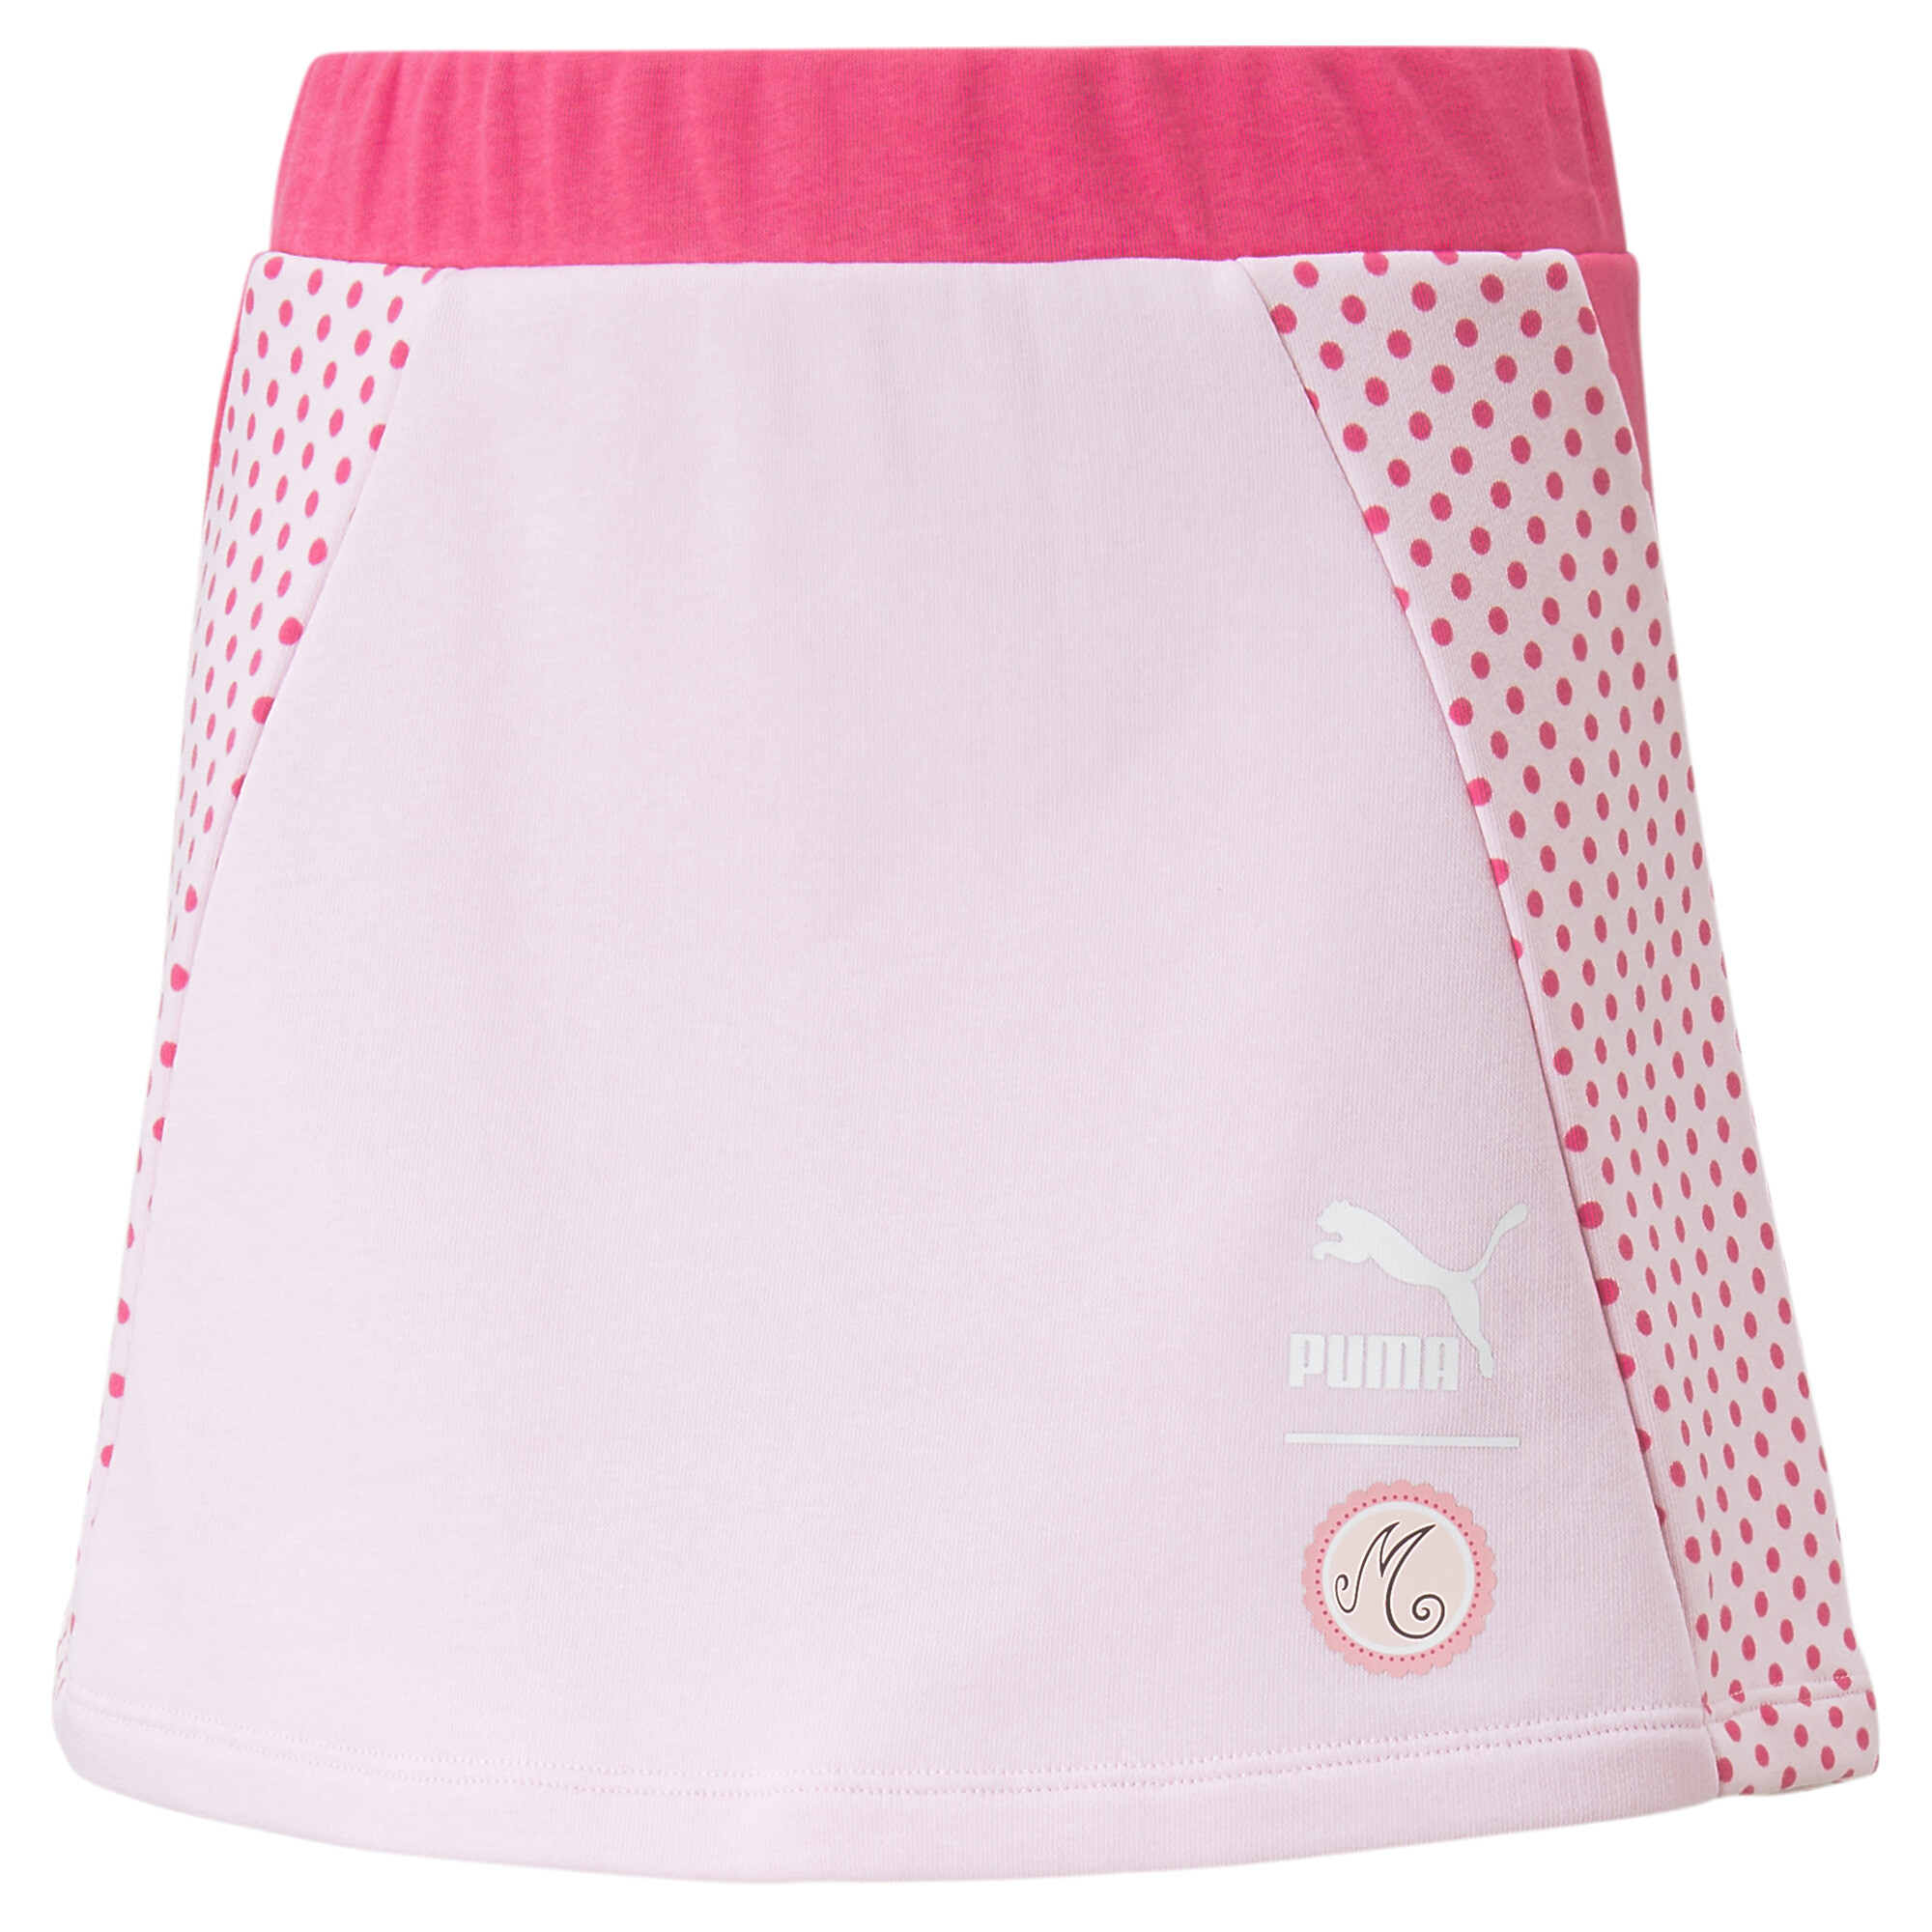 PUMA X MIRACULOUS Skirt In Pink, Size 15-16 Youth